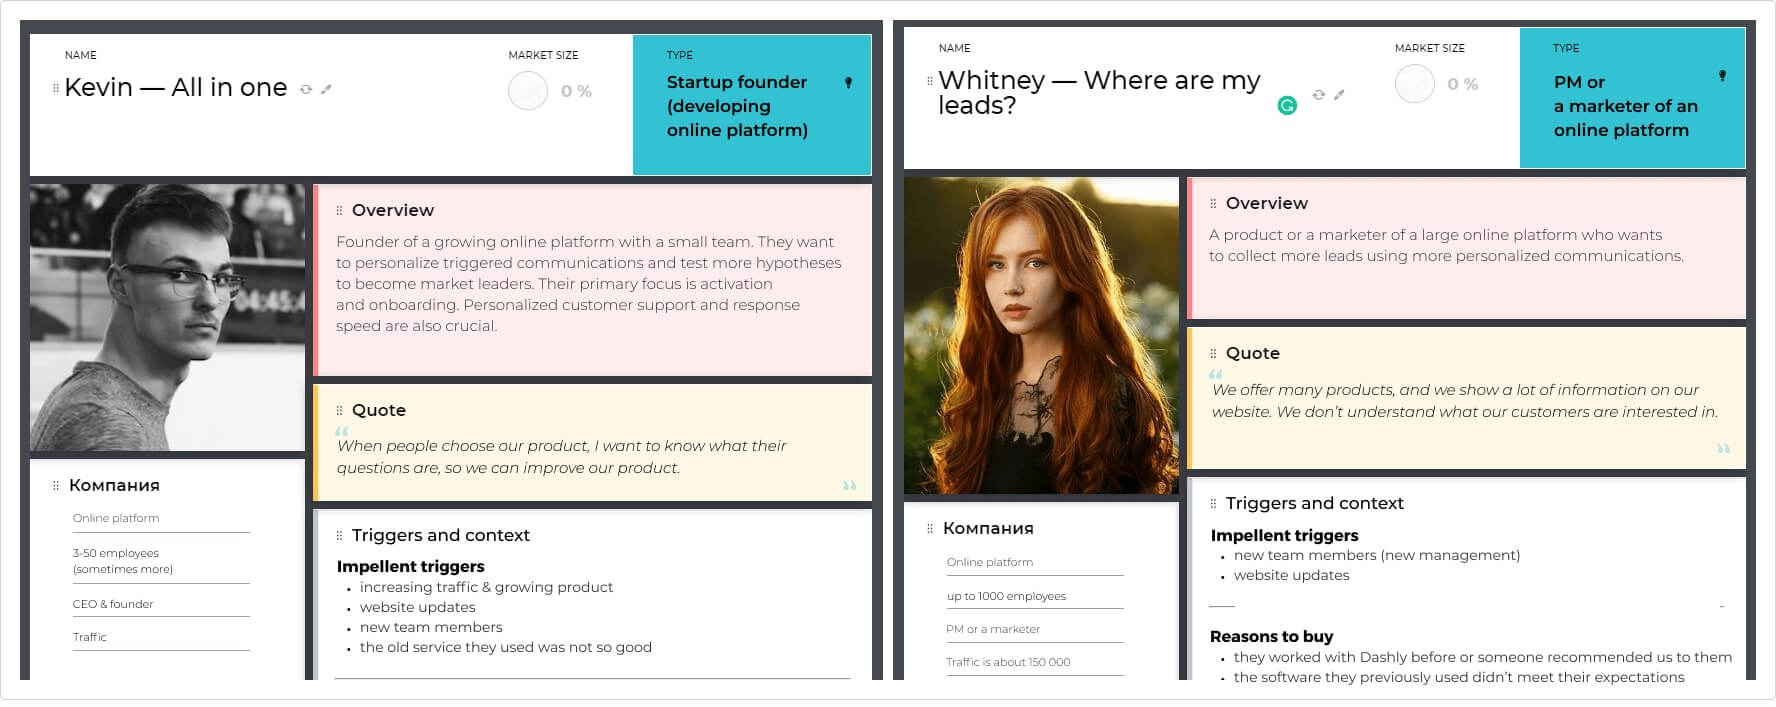 The buyer persona cards of Kevin (“All in one”) and Whitney (“Where are my leads?”)